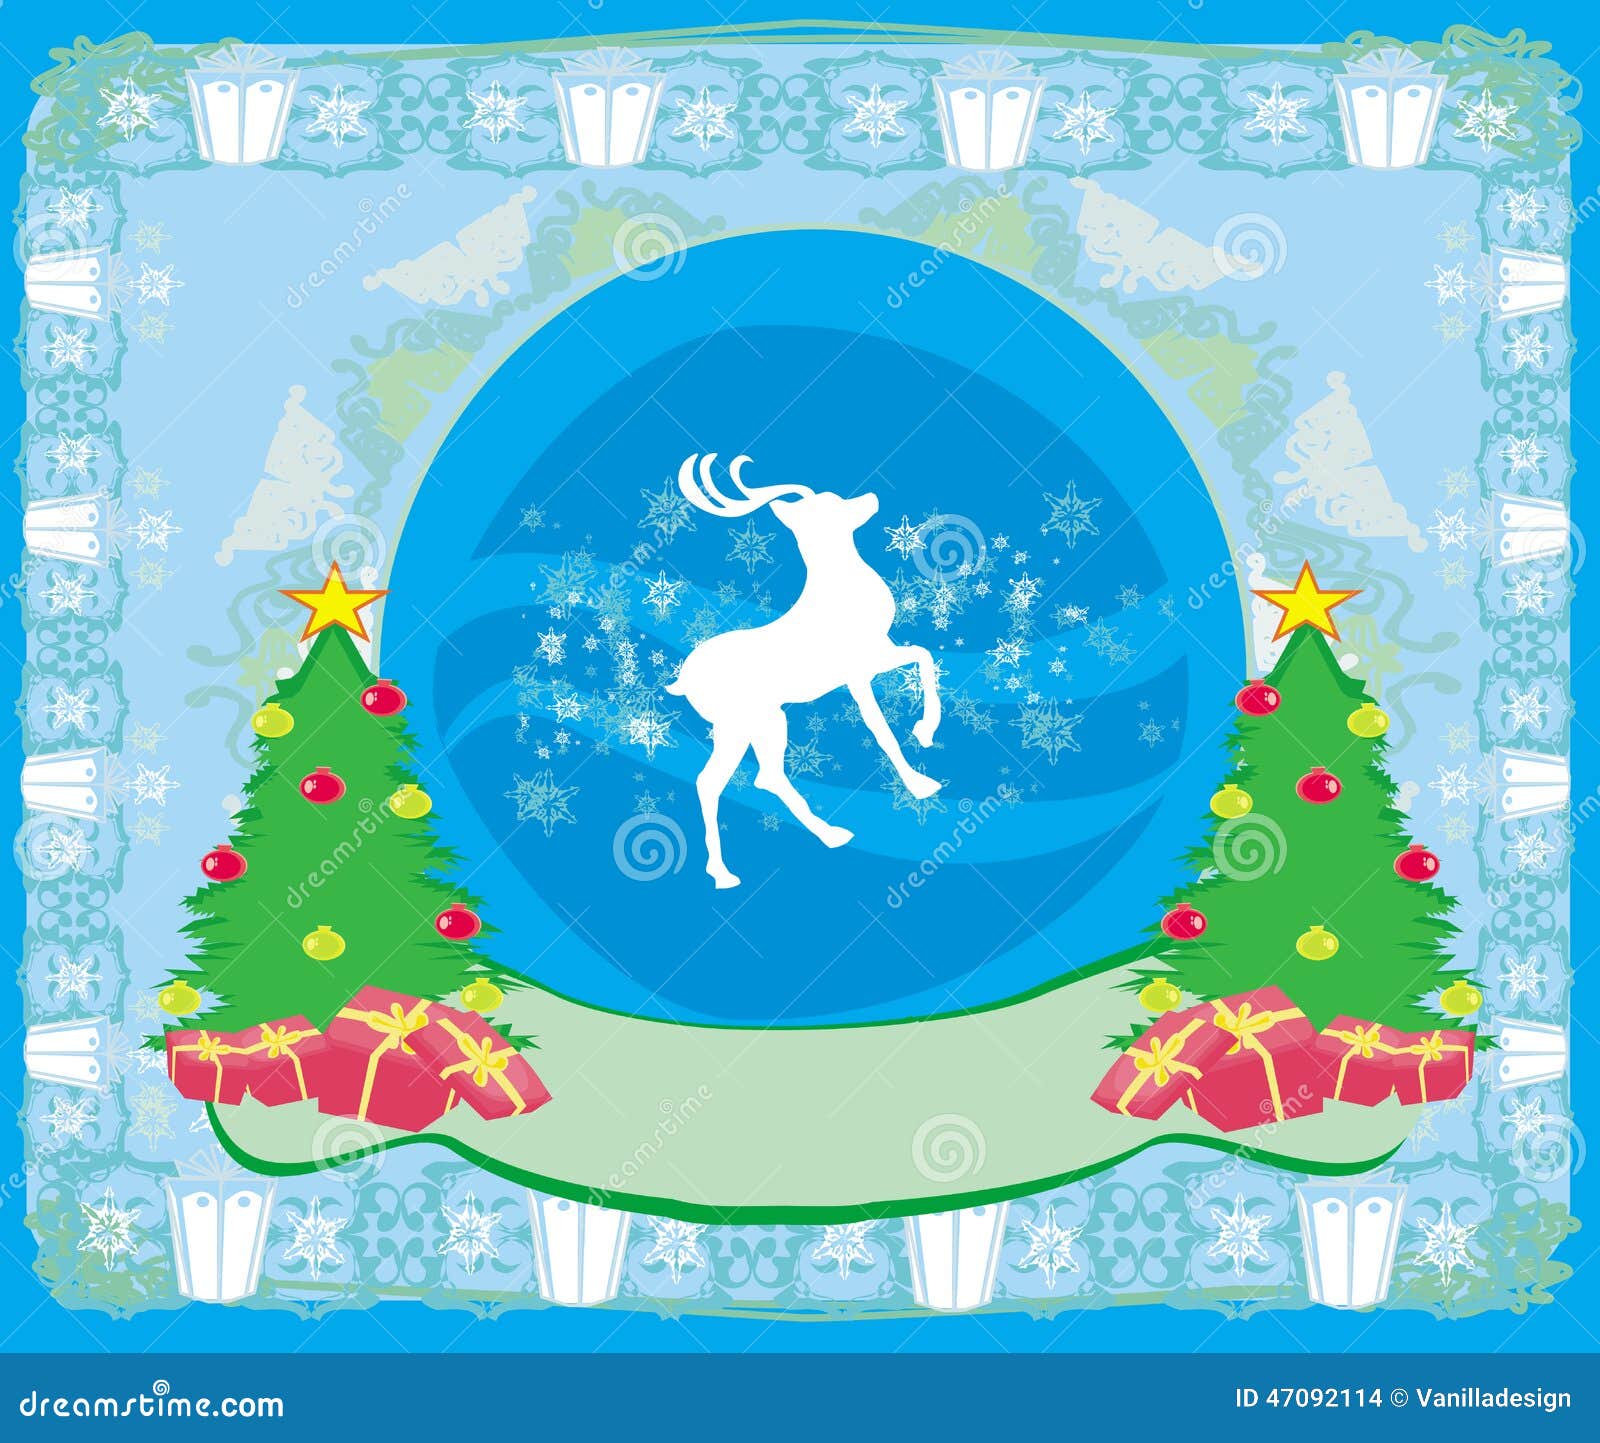 Merry Christmas Card with Snowflakes and Reindeer Stock Vector ...